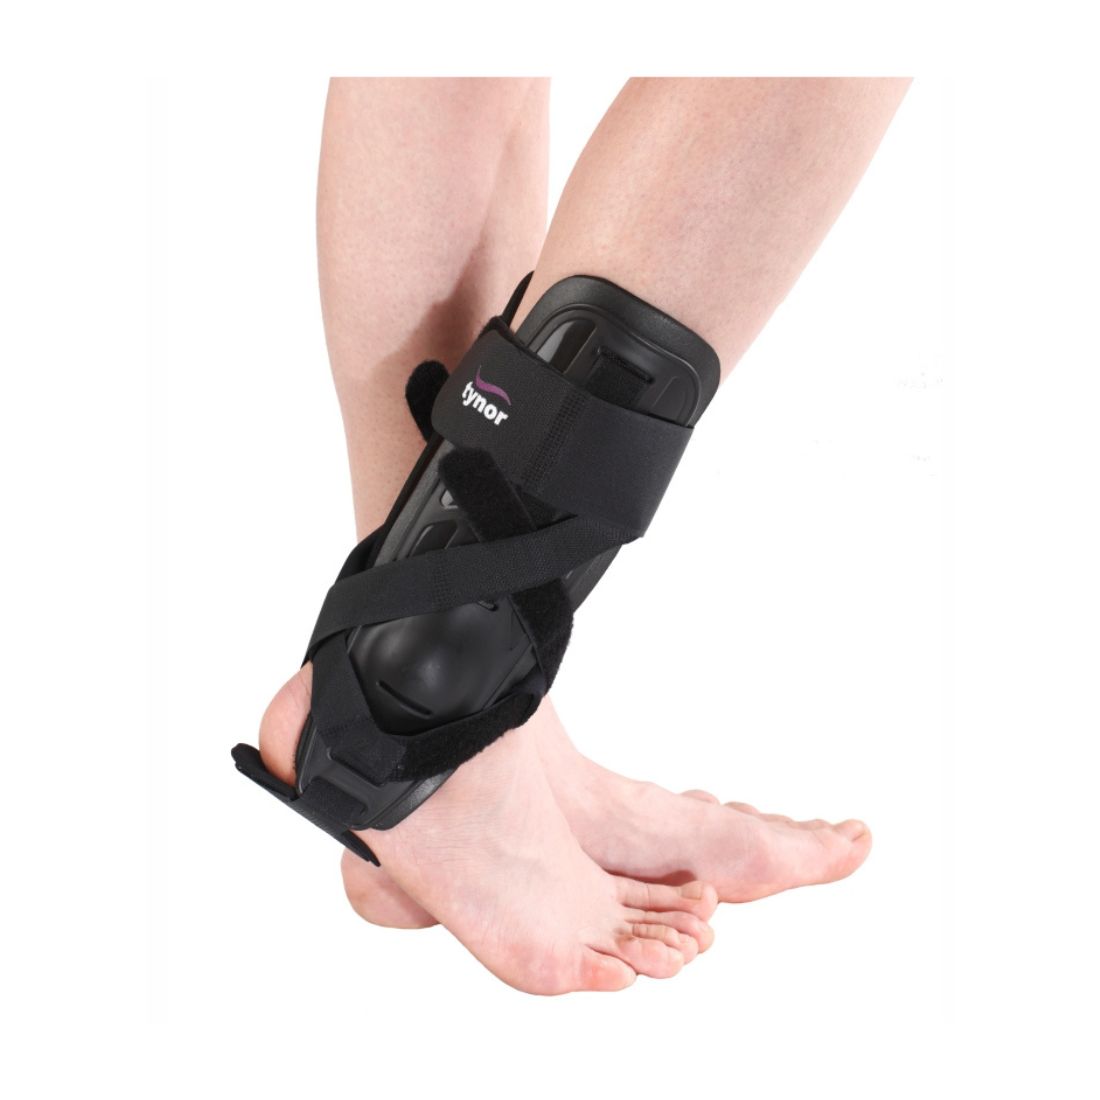 Tynor ankle splint is used for temporary immobilization of sprains, fractures, reduced dislocations, severe soft tissue injuries